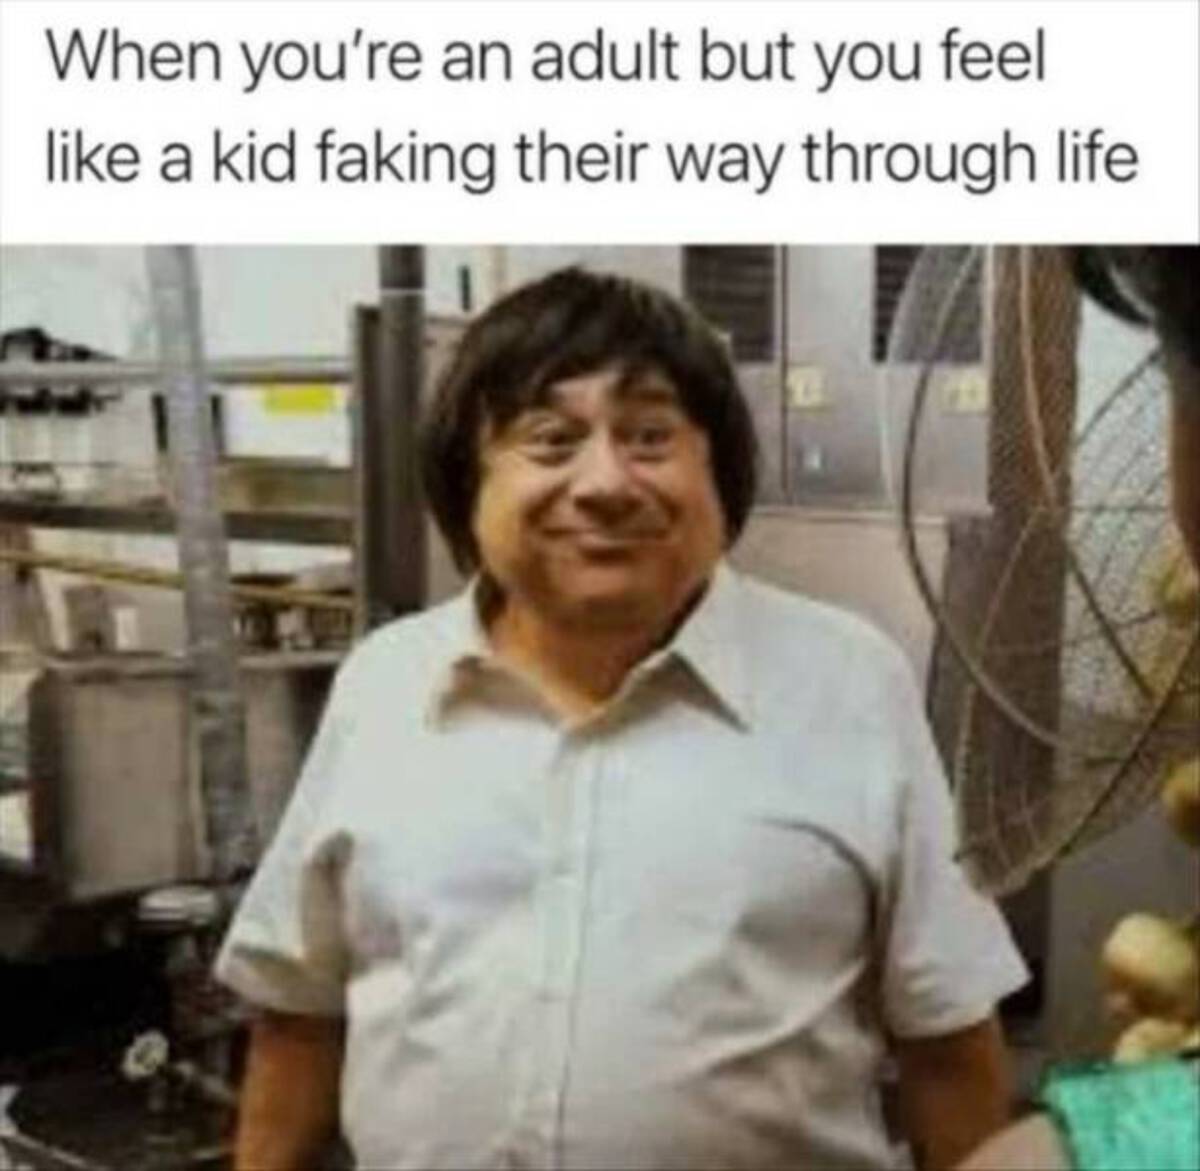 danny devito young always sunny - When you're an adult but you feel a kid faking their way through life